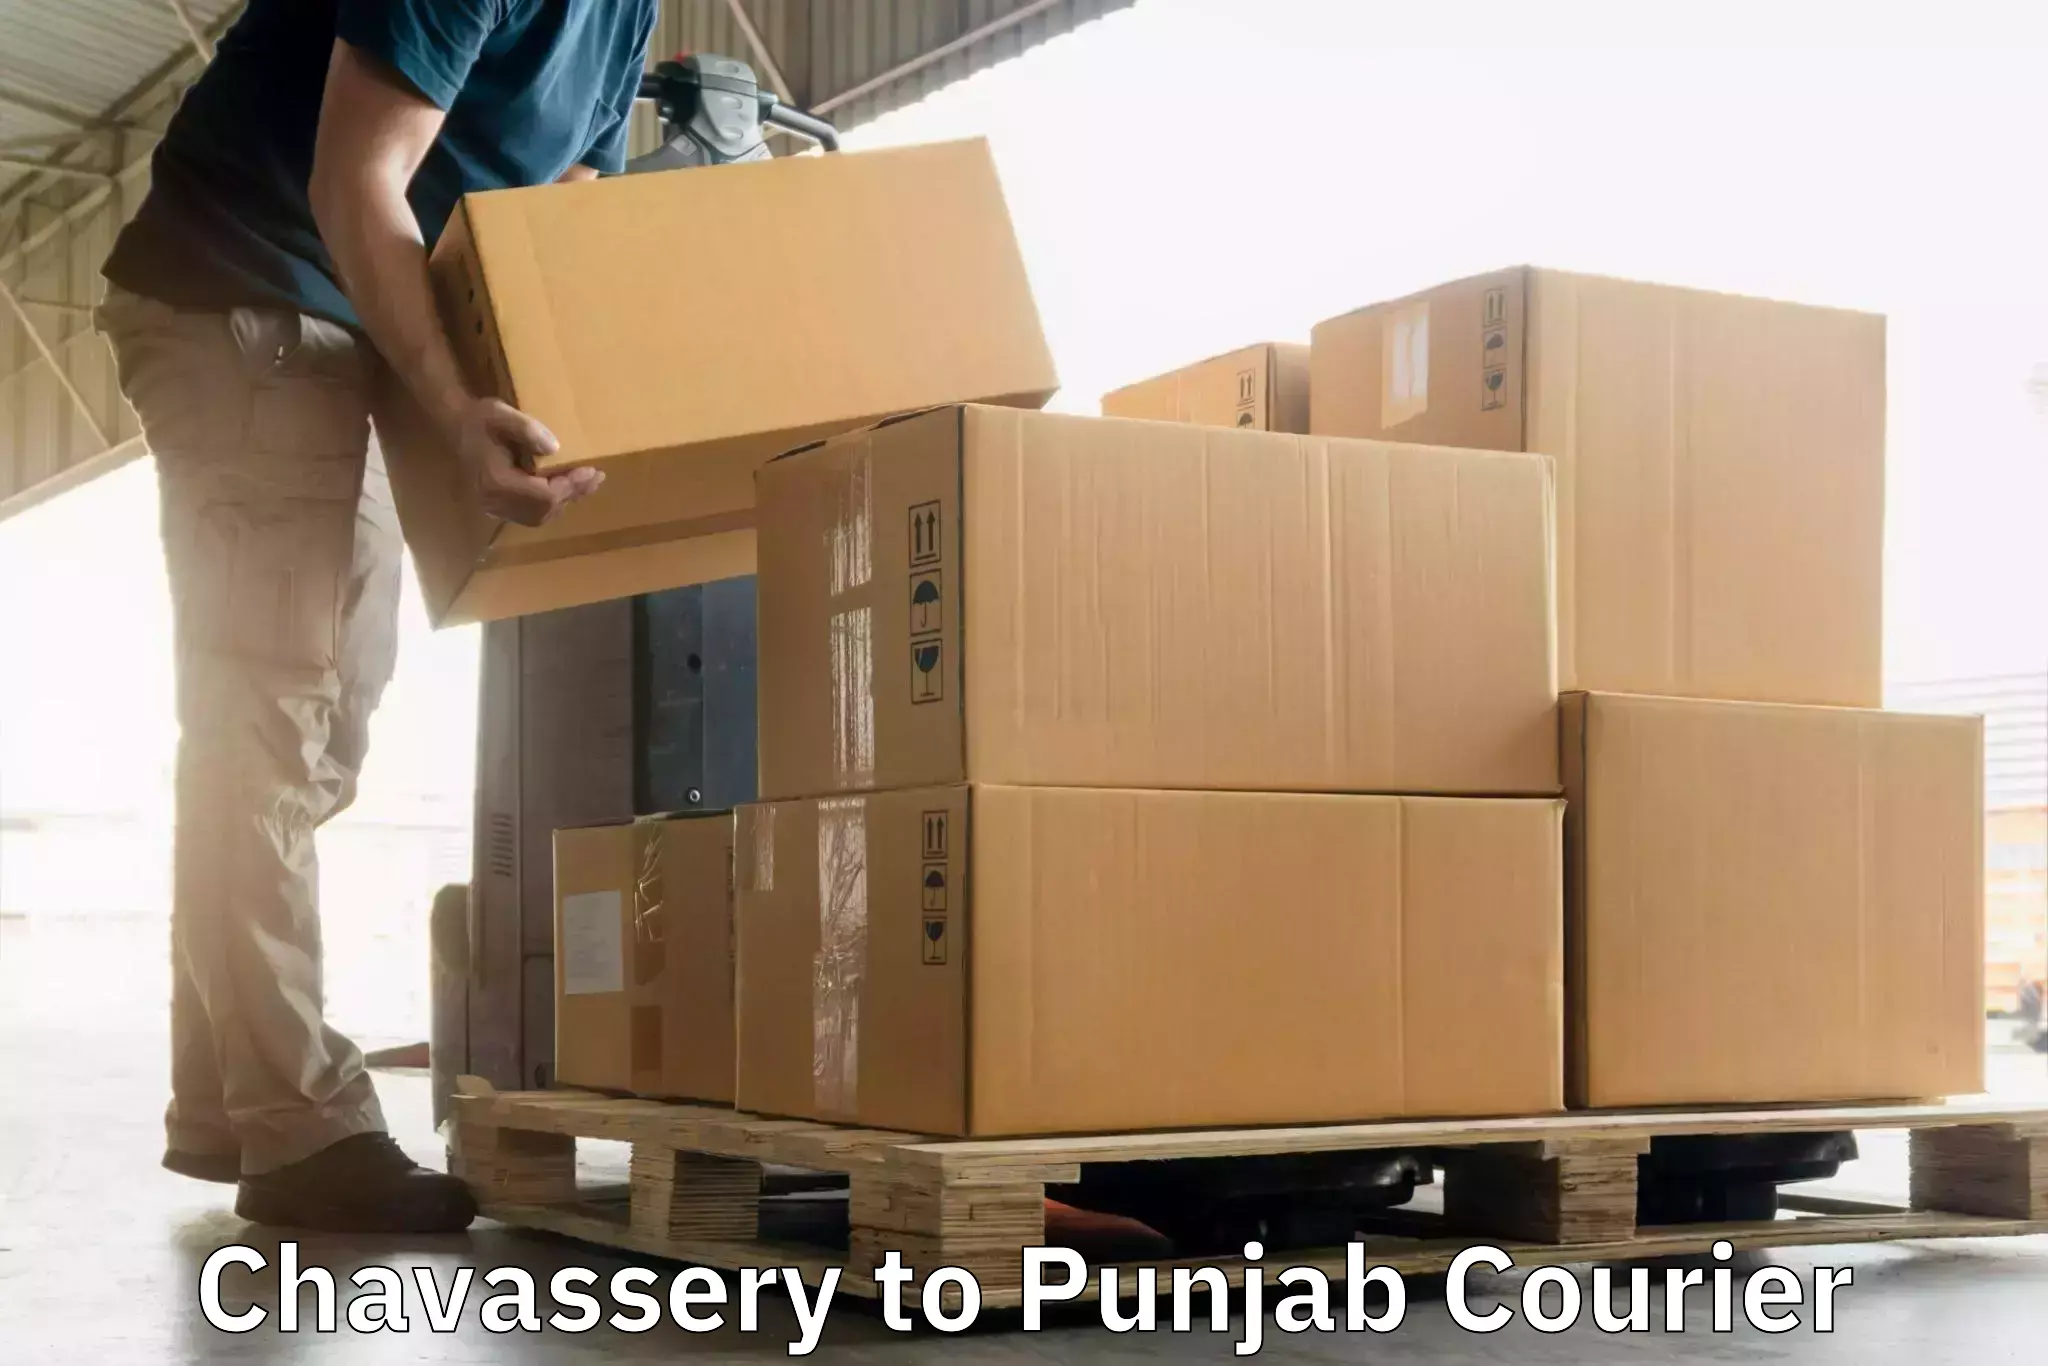 Nationwide parcel services Chavassery to Punjab